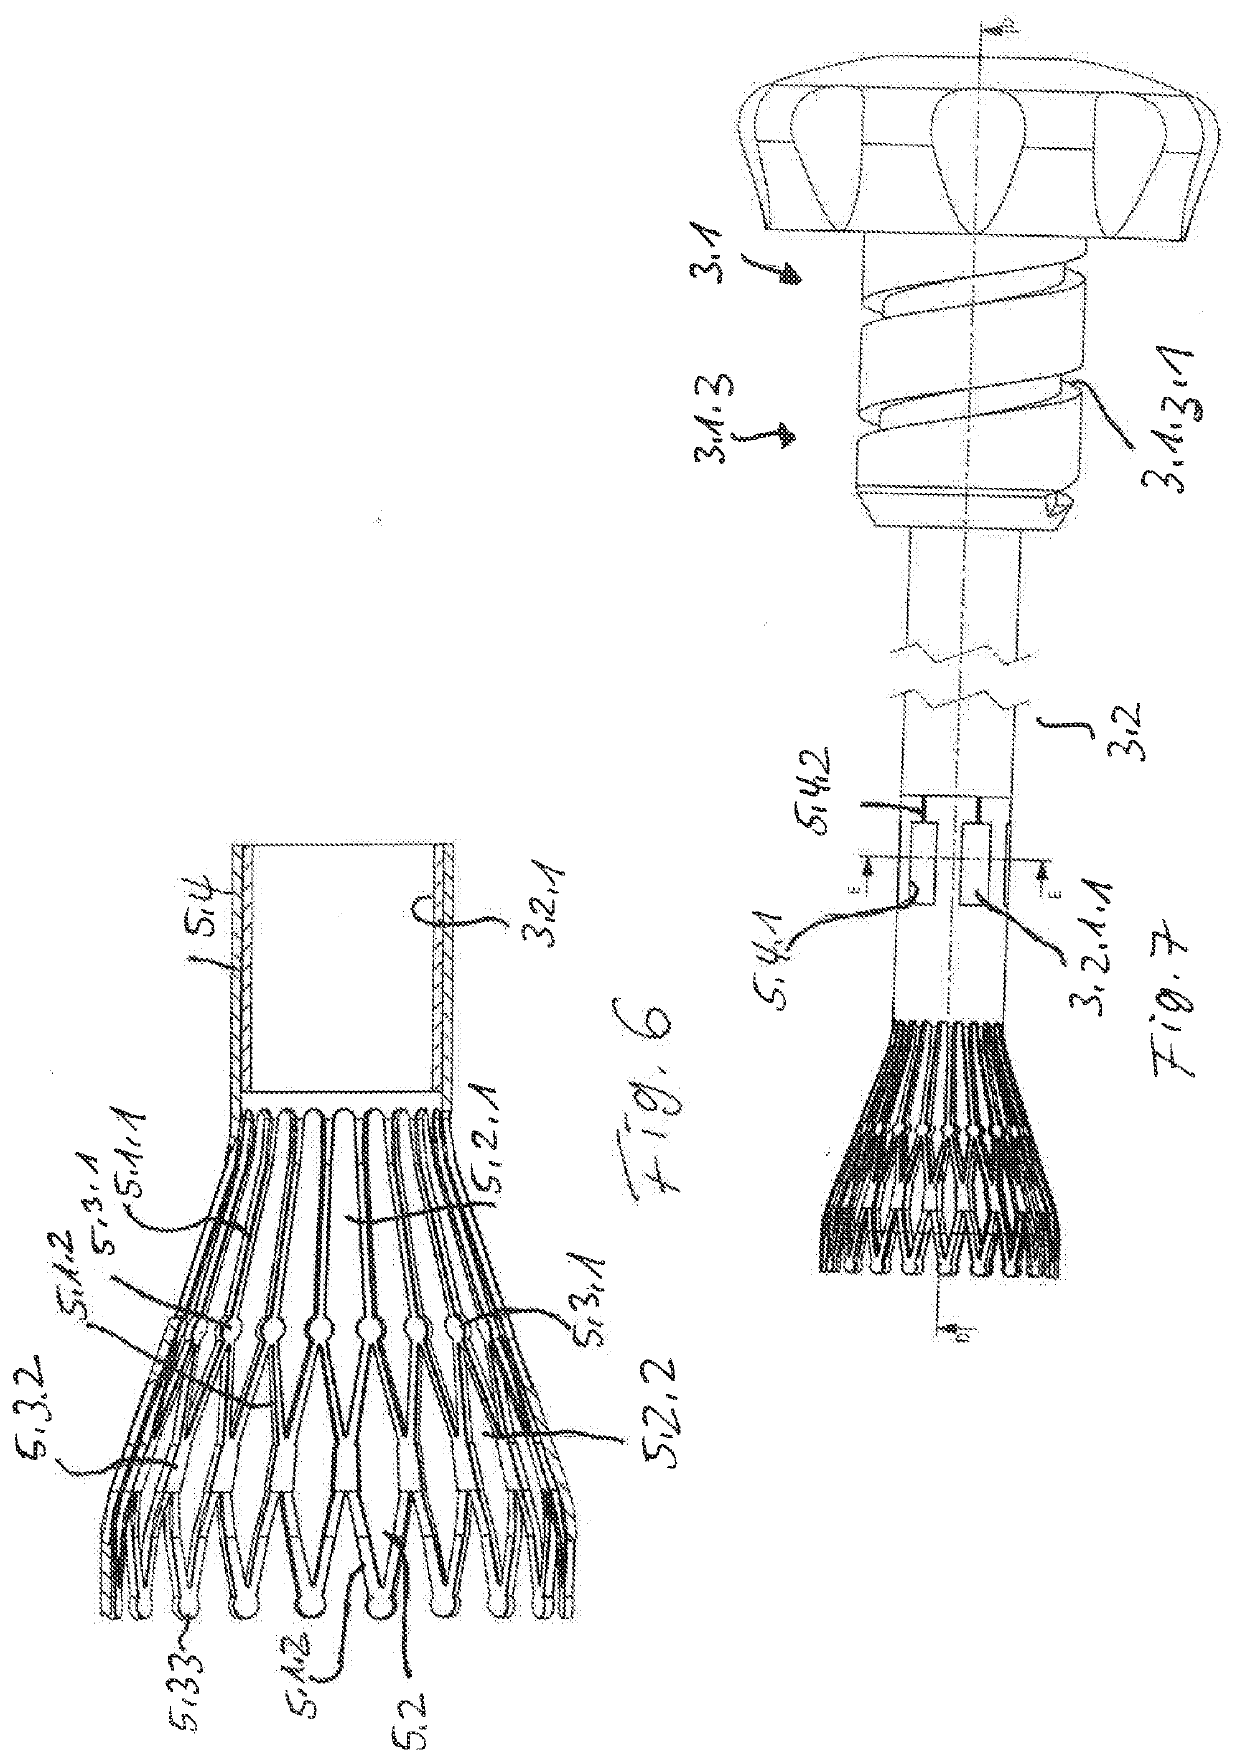 Device for access to the interior of a body